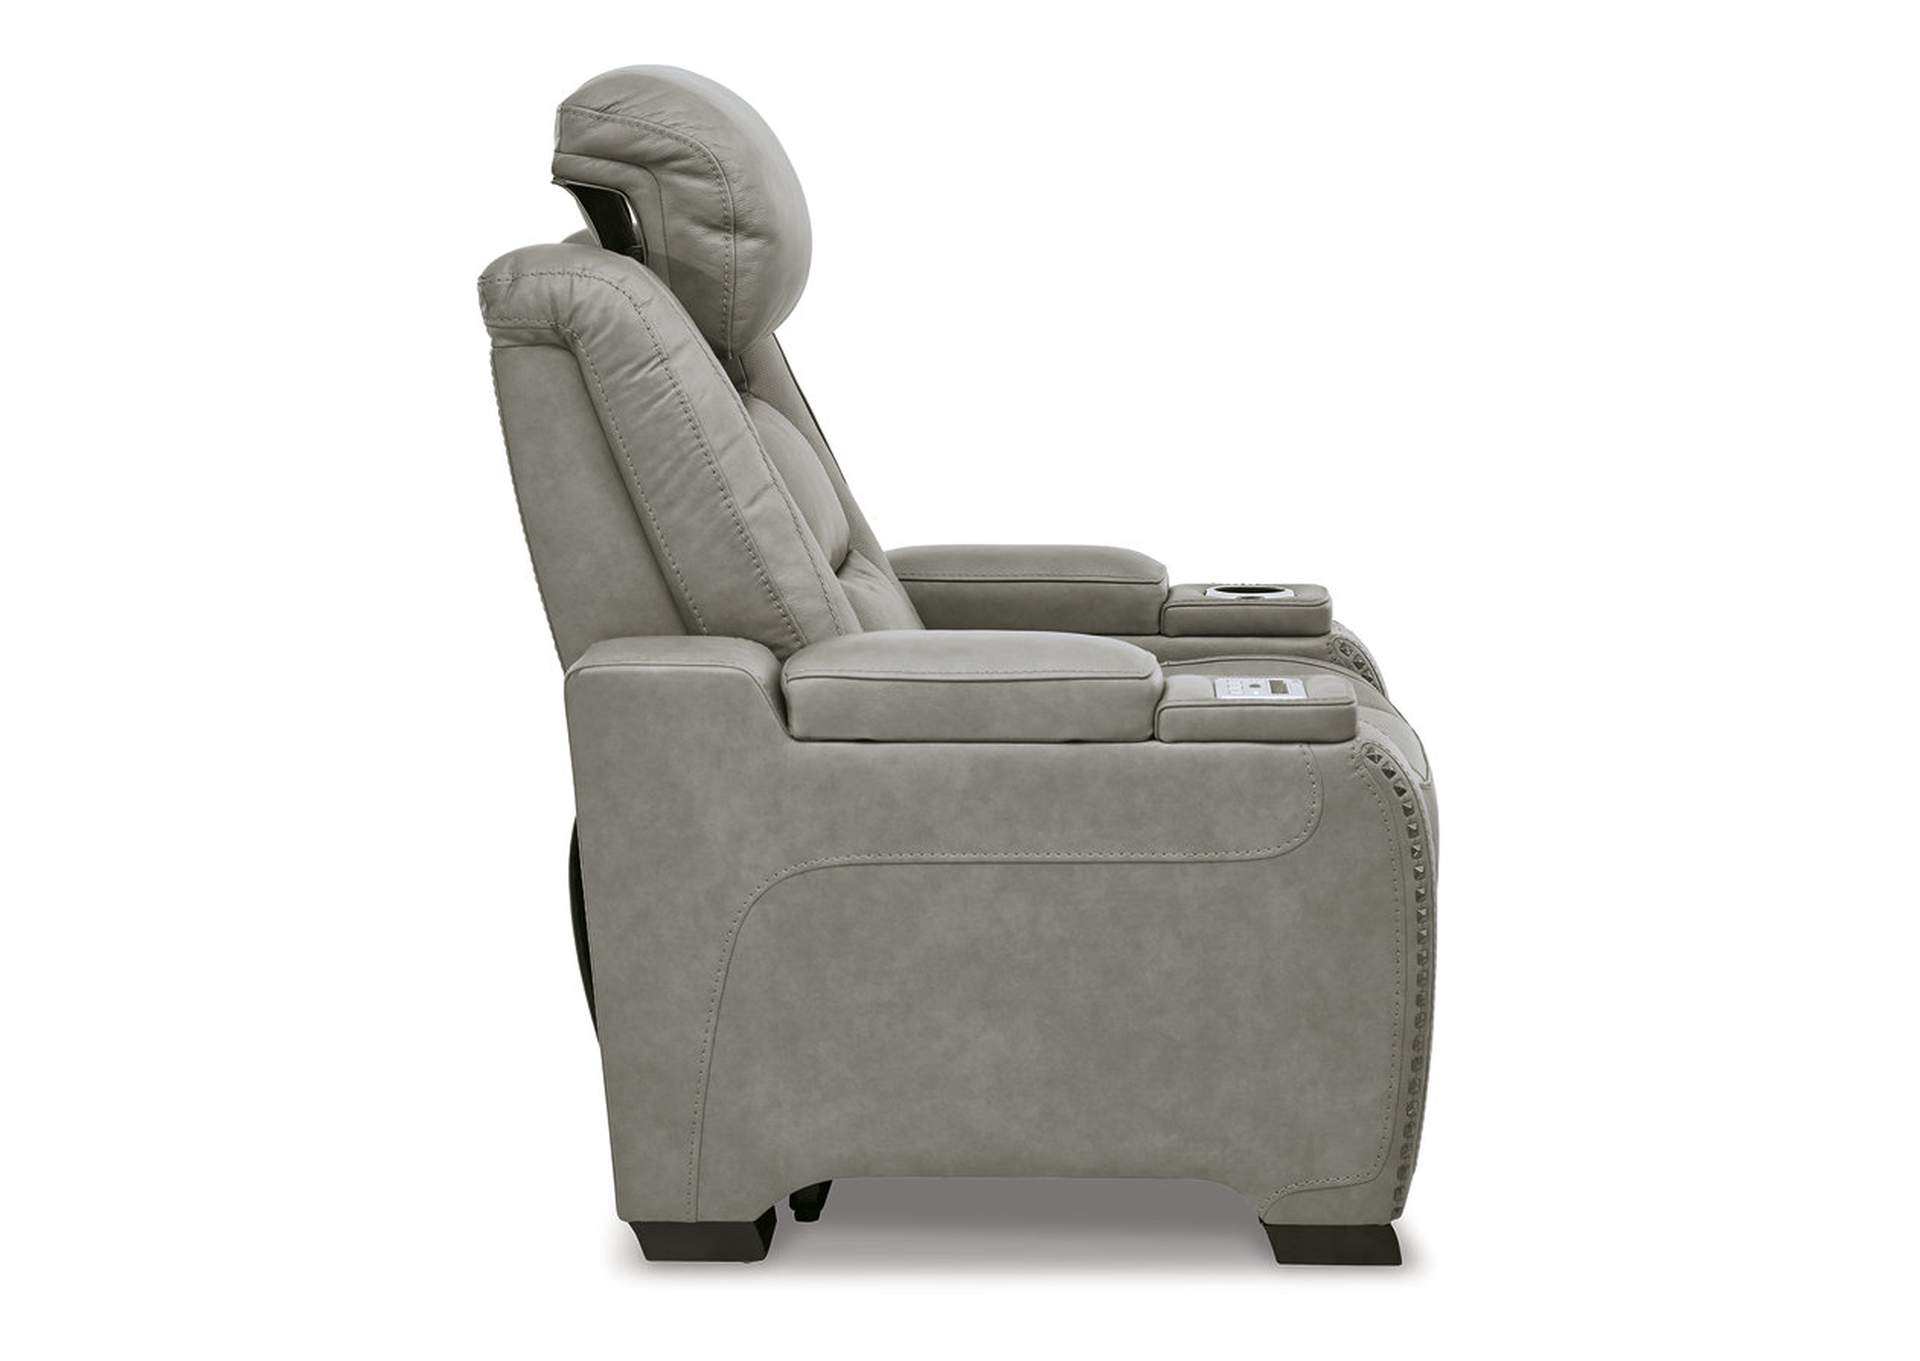 The Man-Den Power Recliner,Signature Design By Ashley